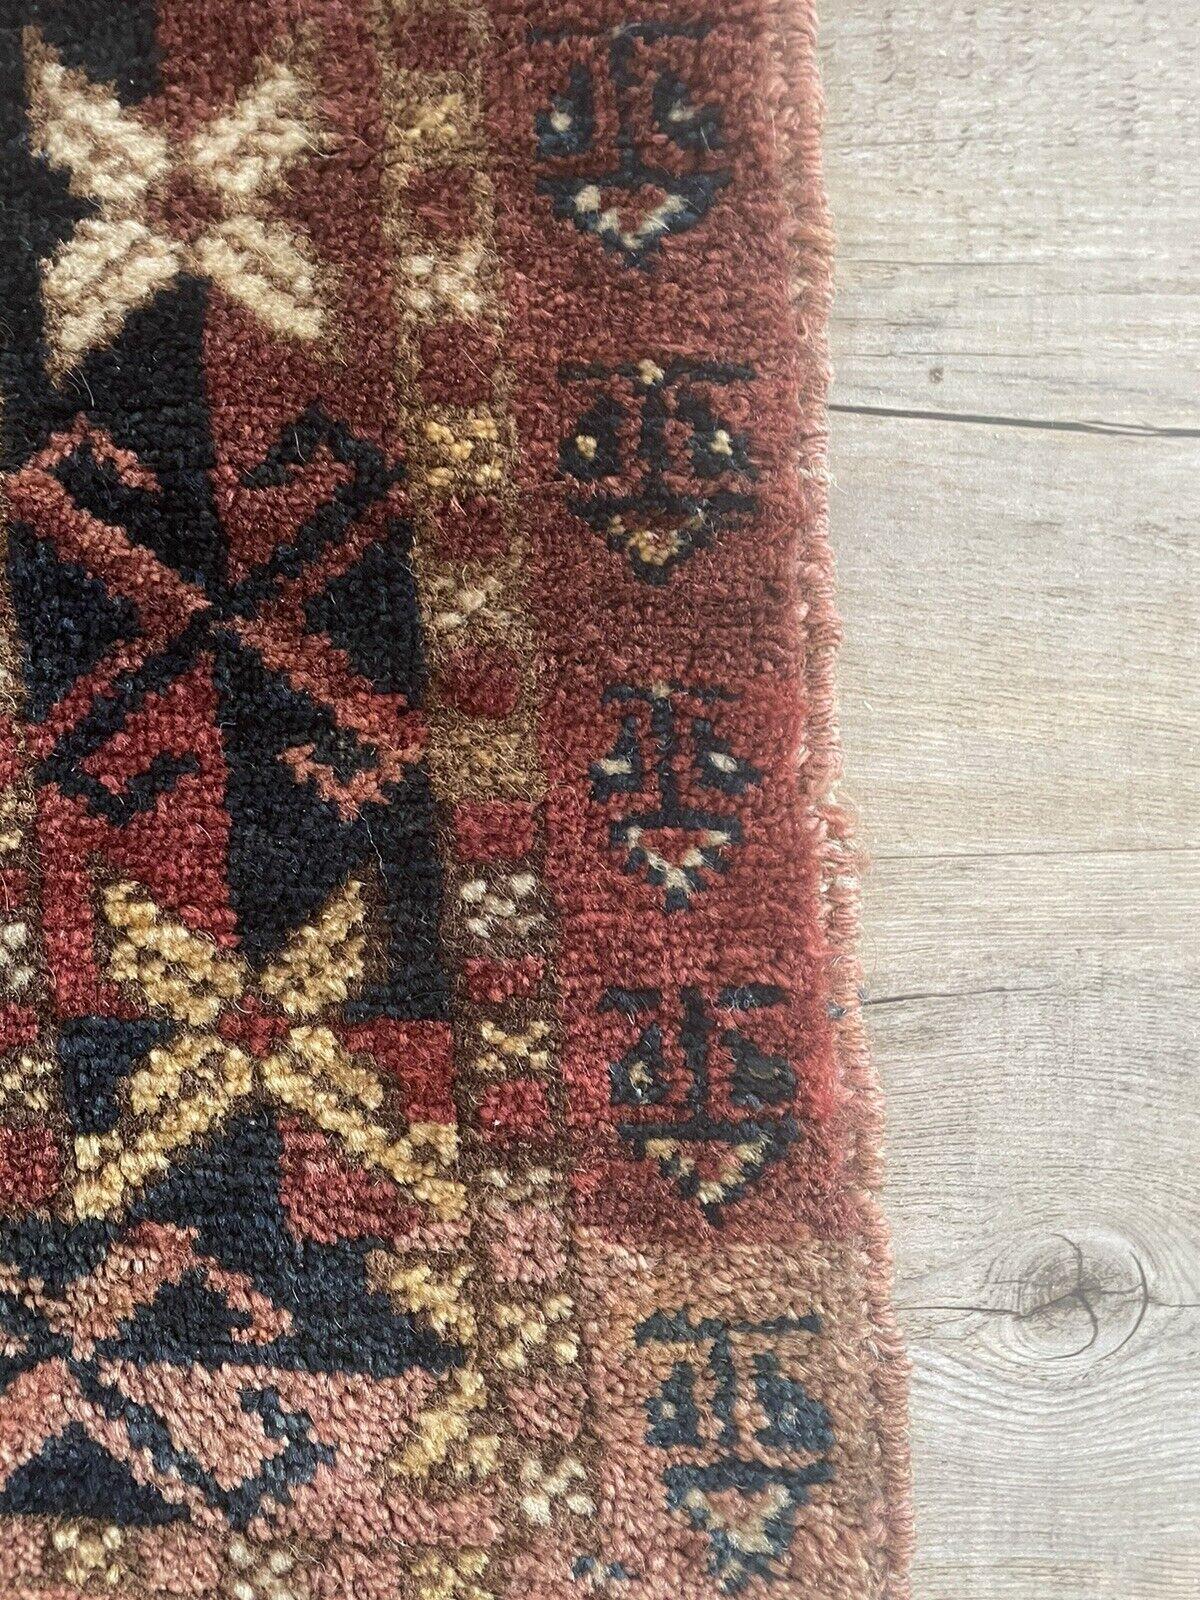 Handmade Antique Afghan Beshir Collectible Chuval Rug 1.5' x 4.8', 1900s - 1N11 For Sale 7